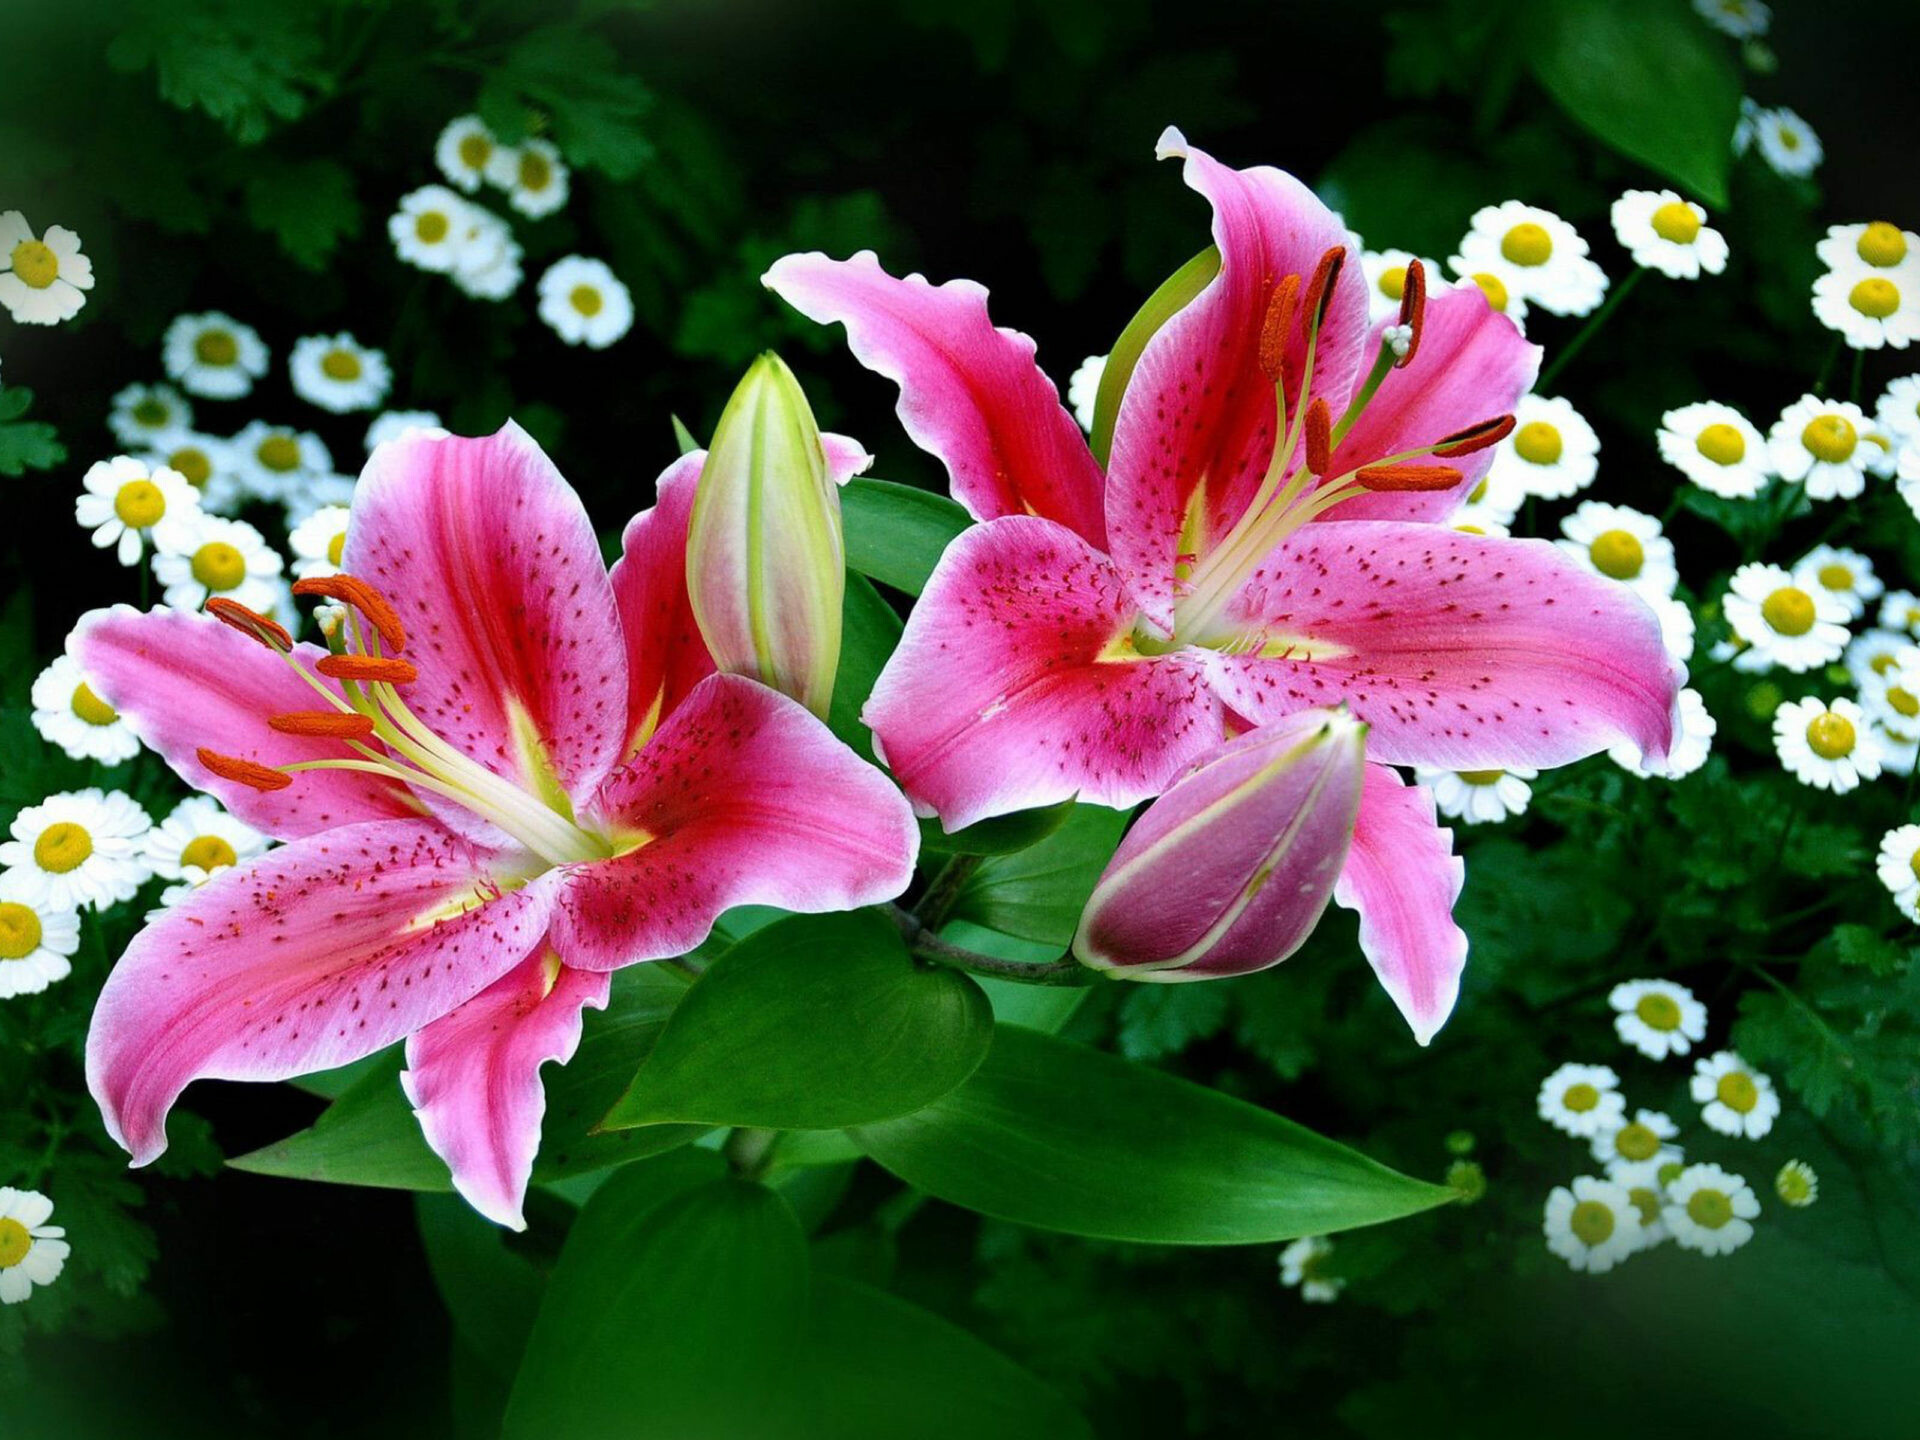 Tiger lilies, Lily flowers, Lily garden, Lovely wallpapers, 1920x1440 HD Desktop